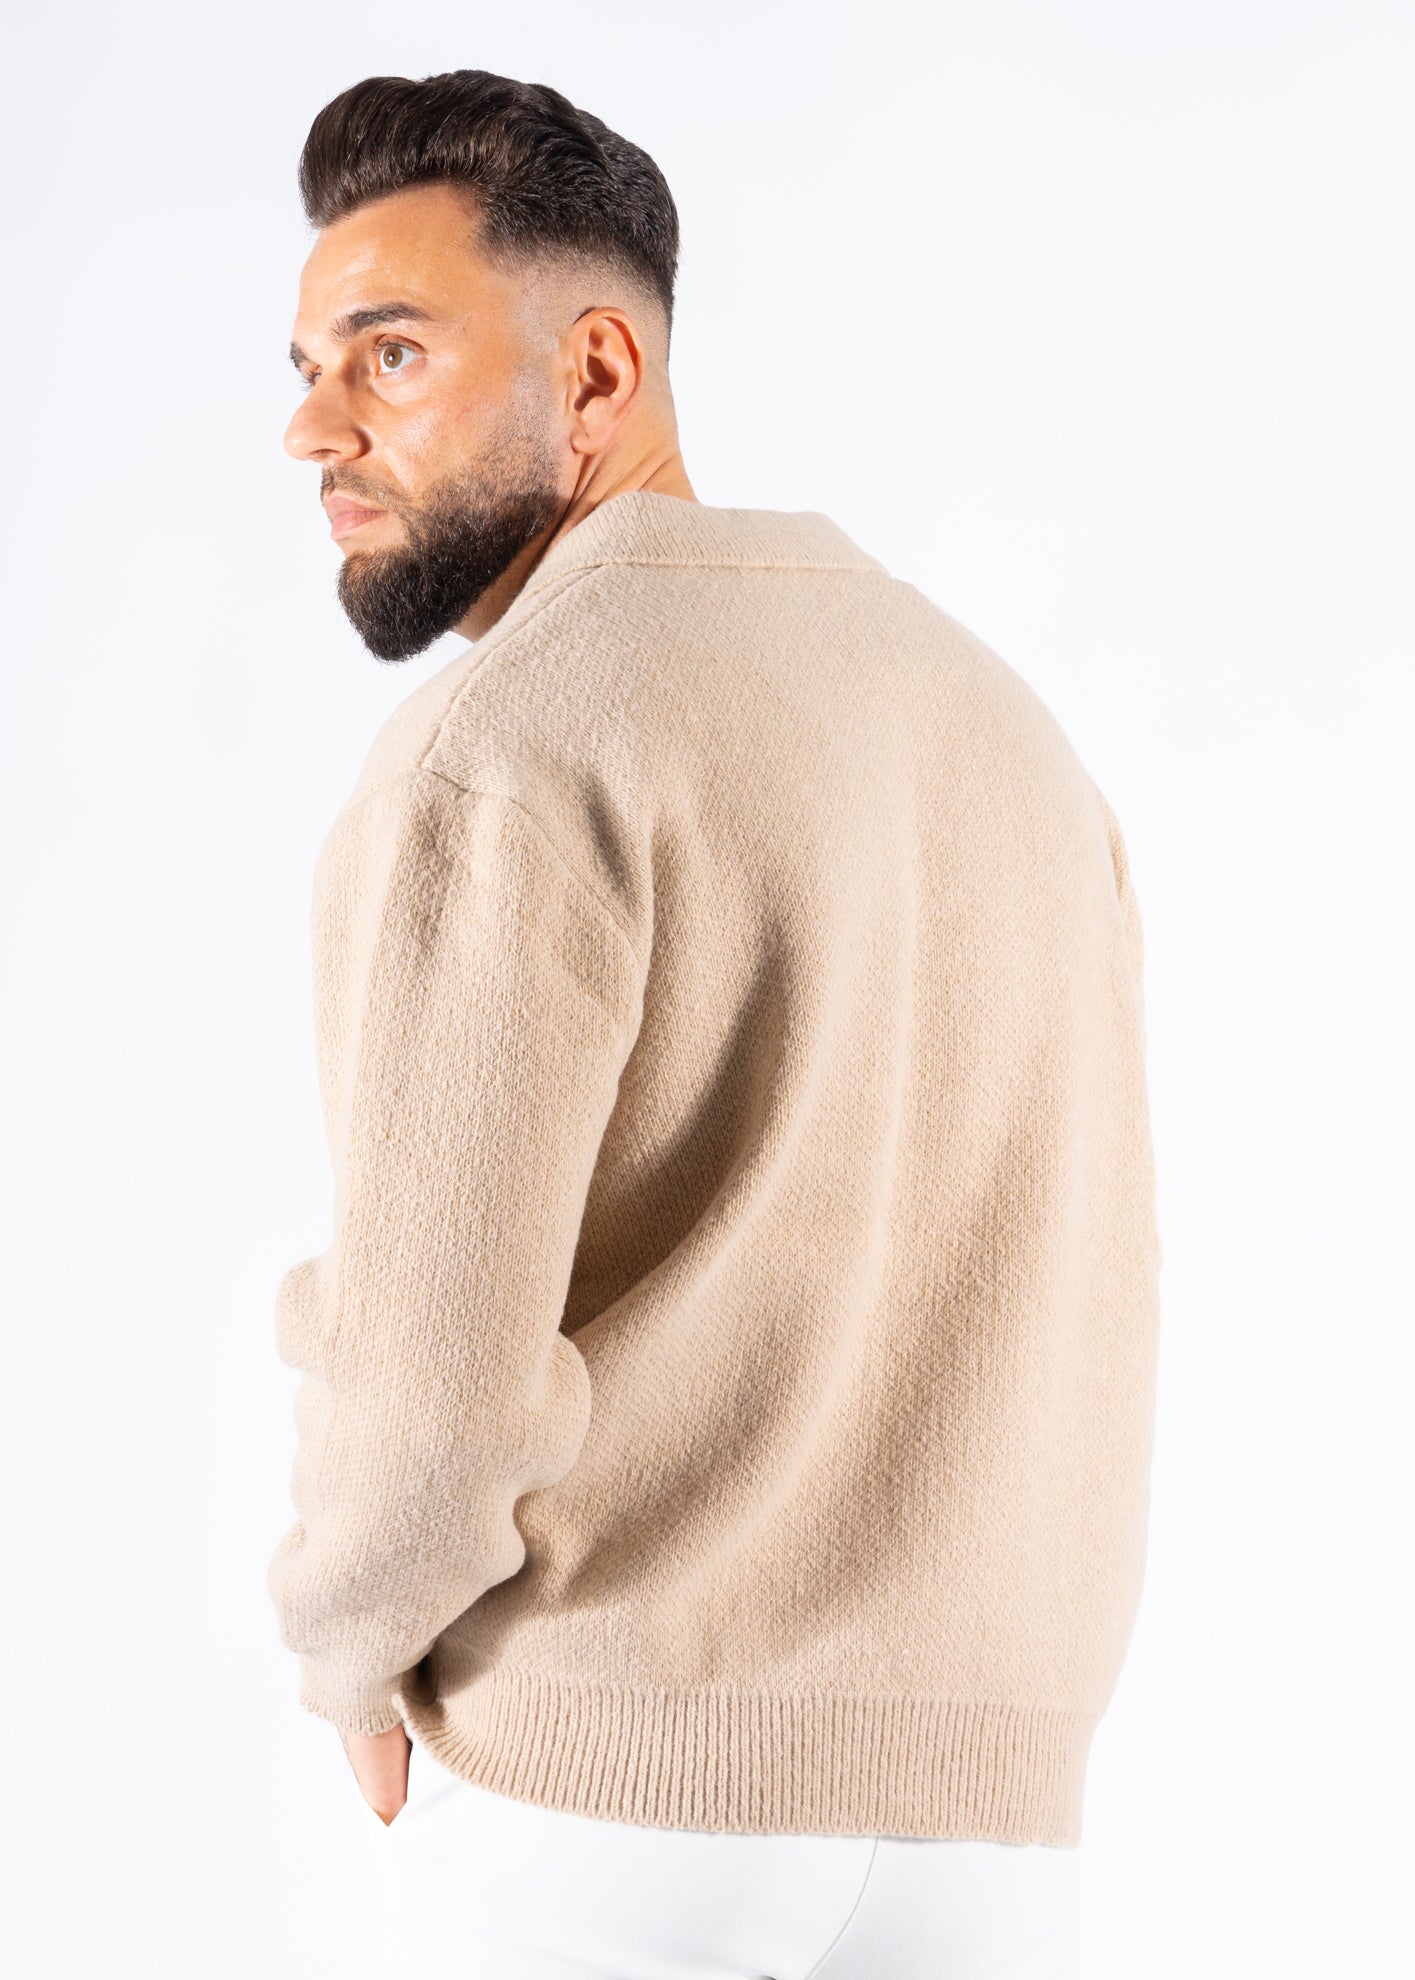 Sweater polo knitted beige oversized